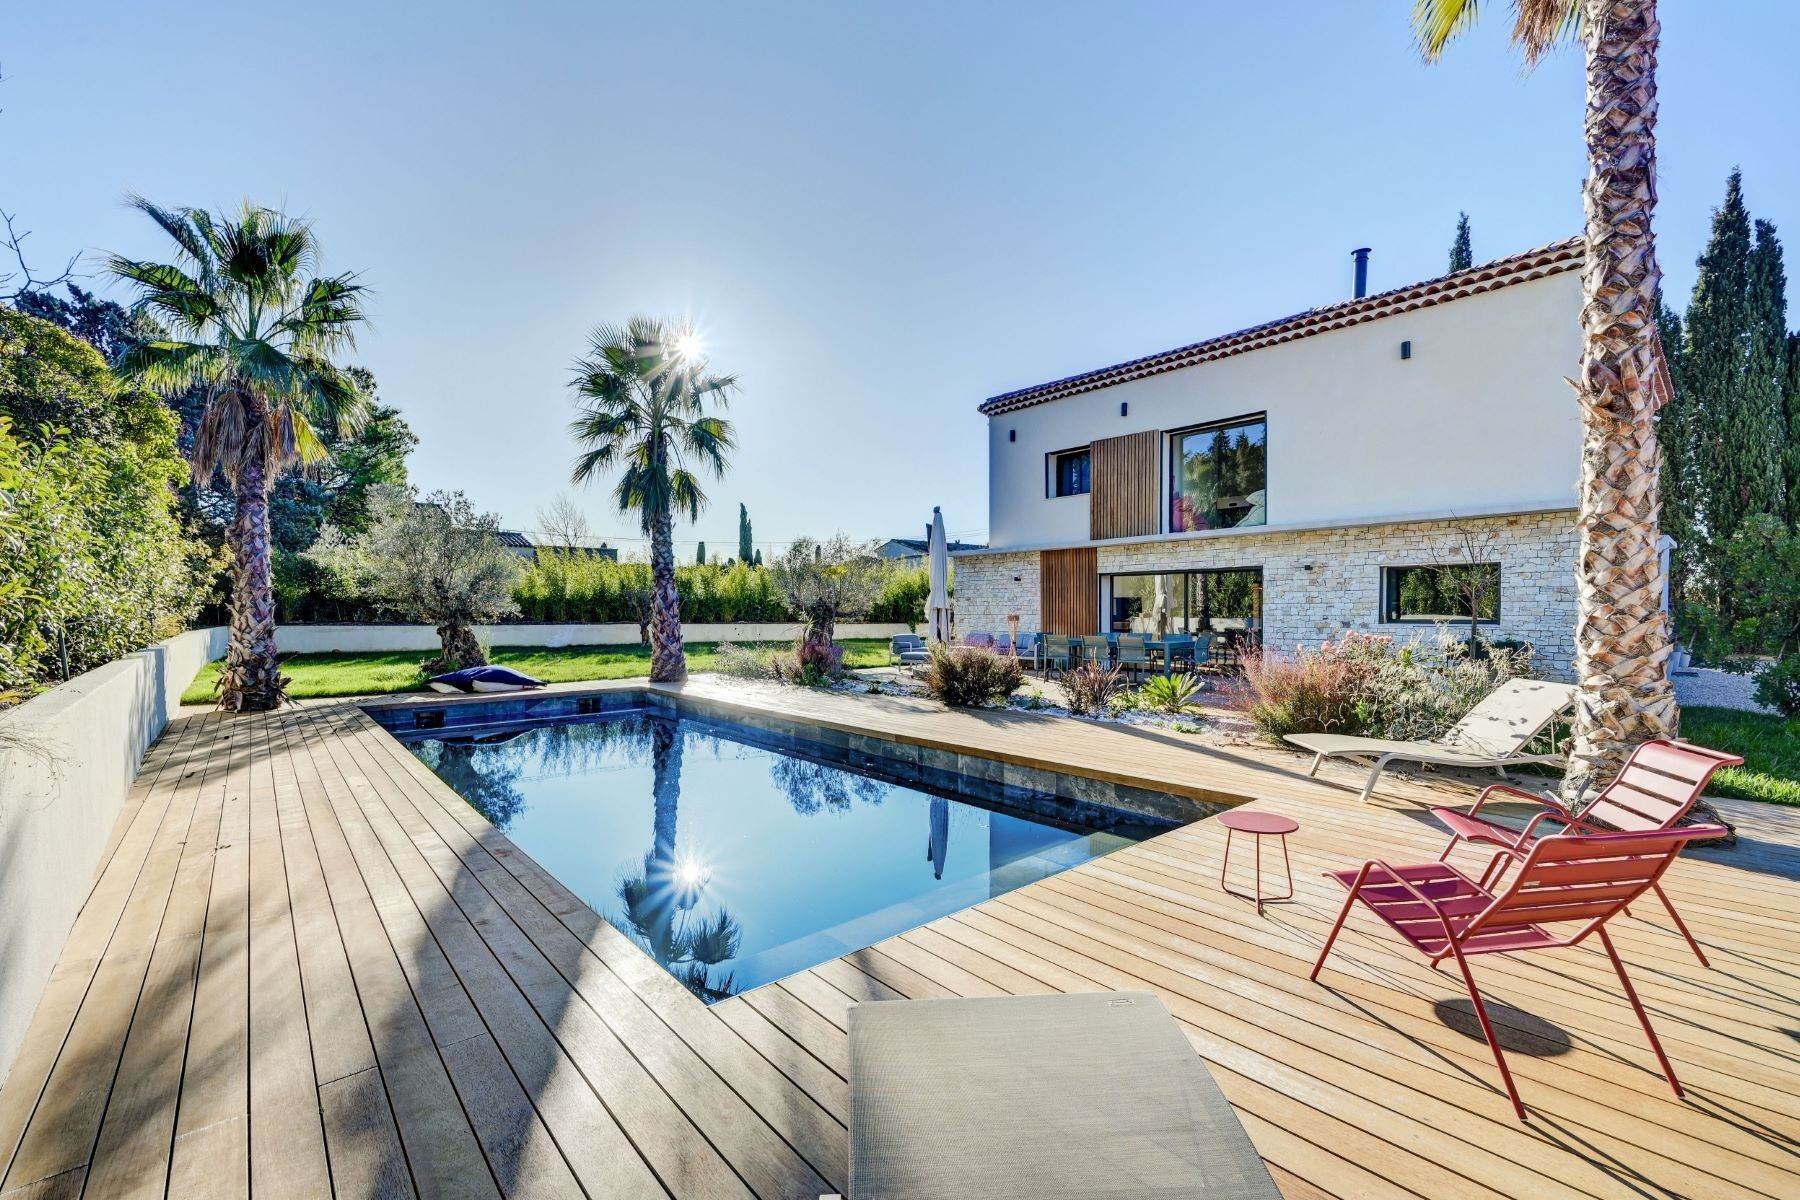 Single Family Homes for Sale at LUXURY HOME Aix-En-Provence, Provence-Alpes-Cote D'Azur 13100 France